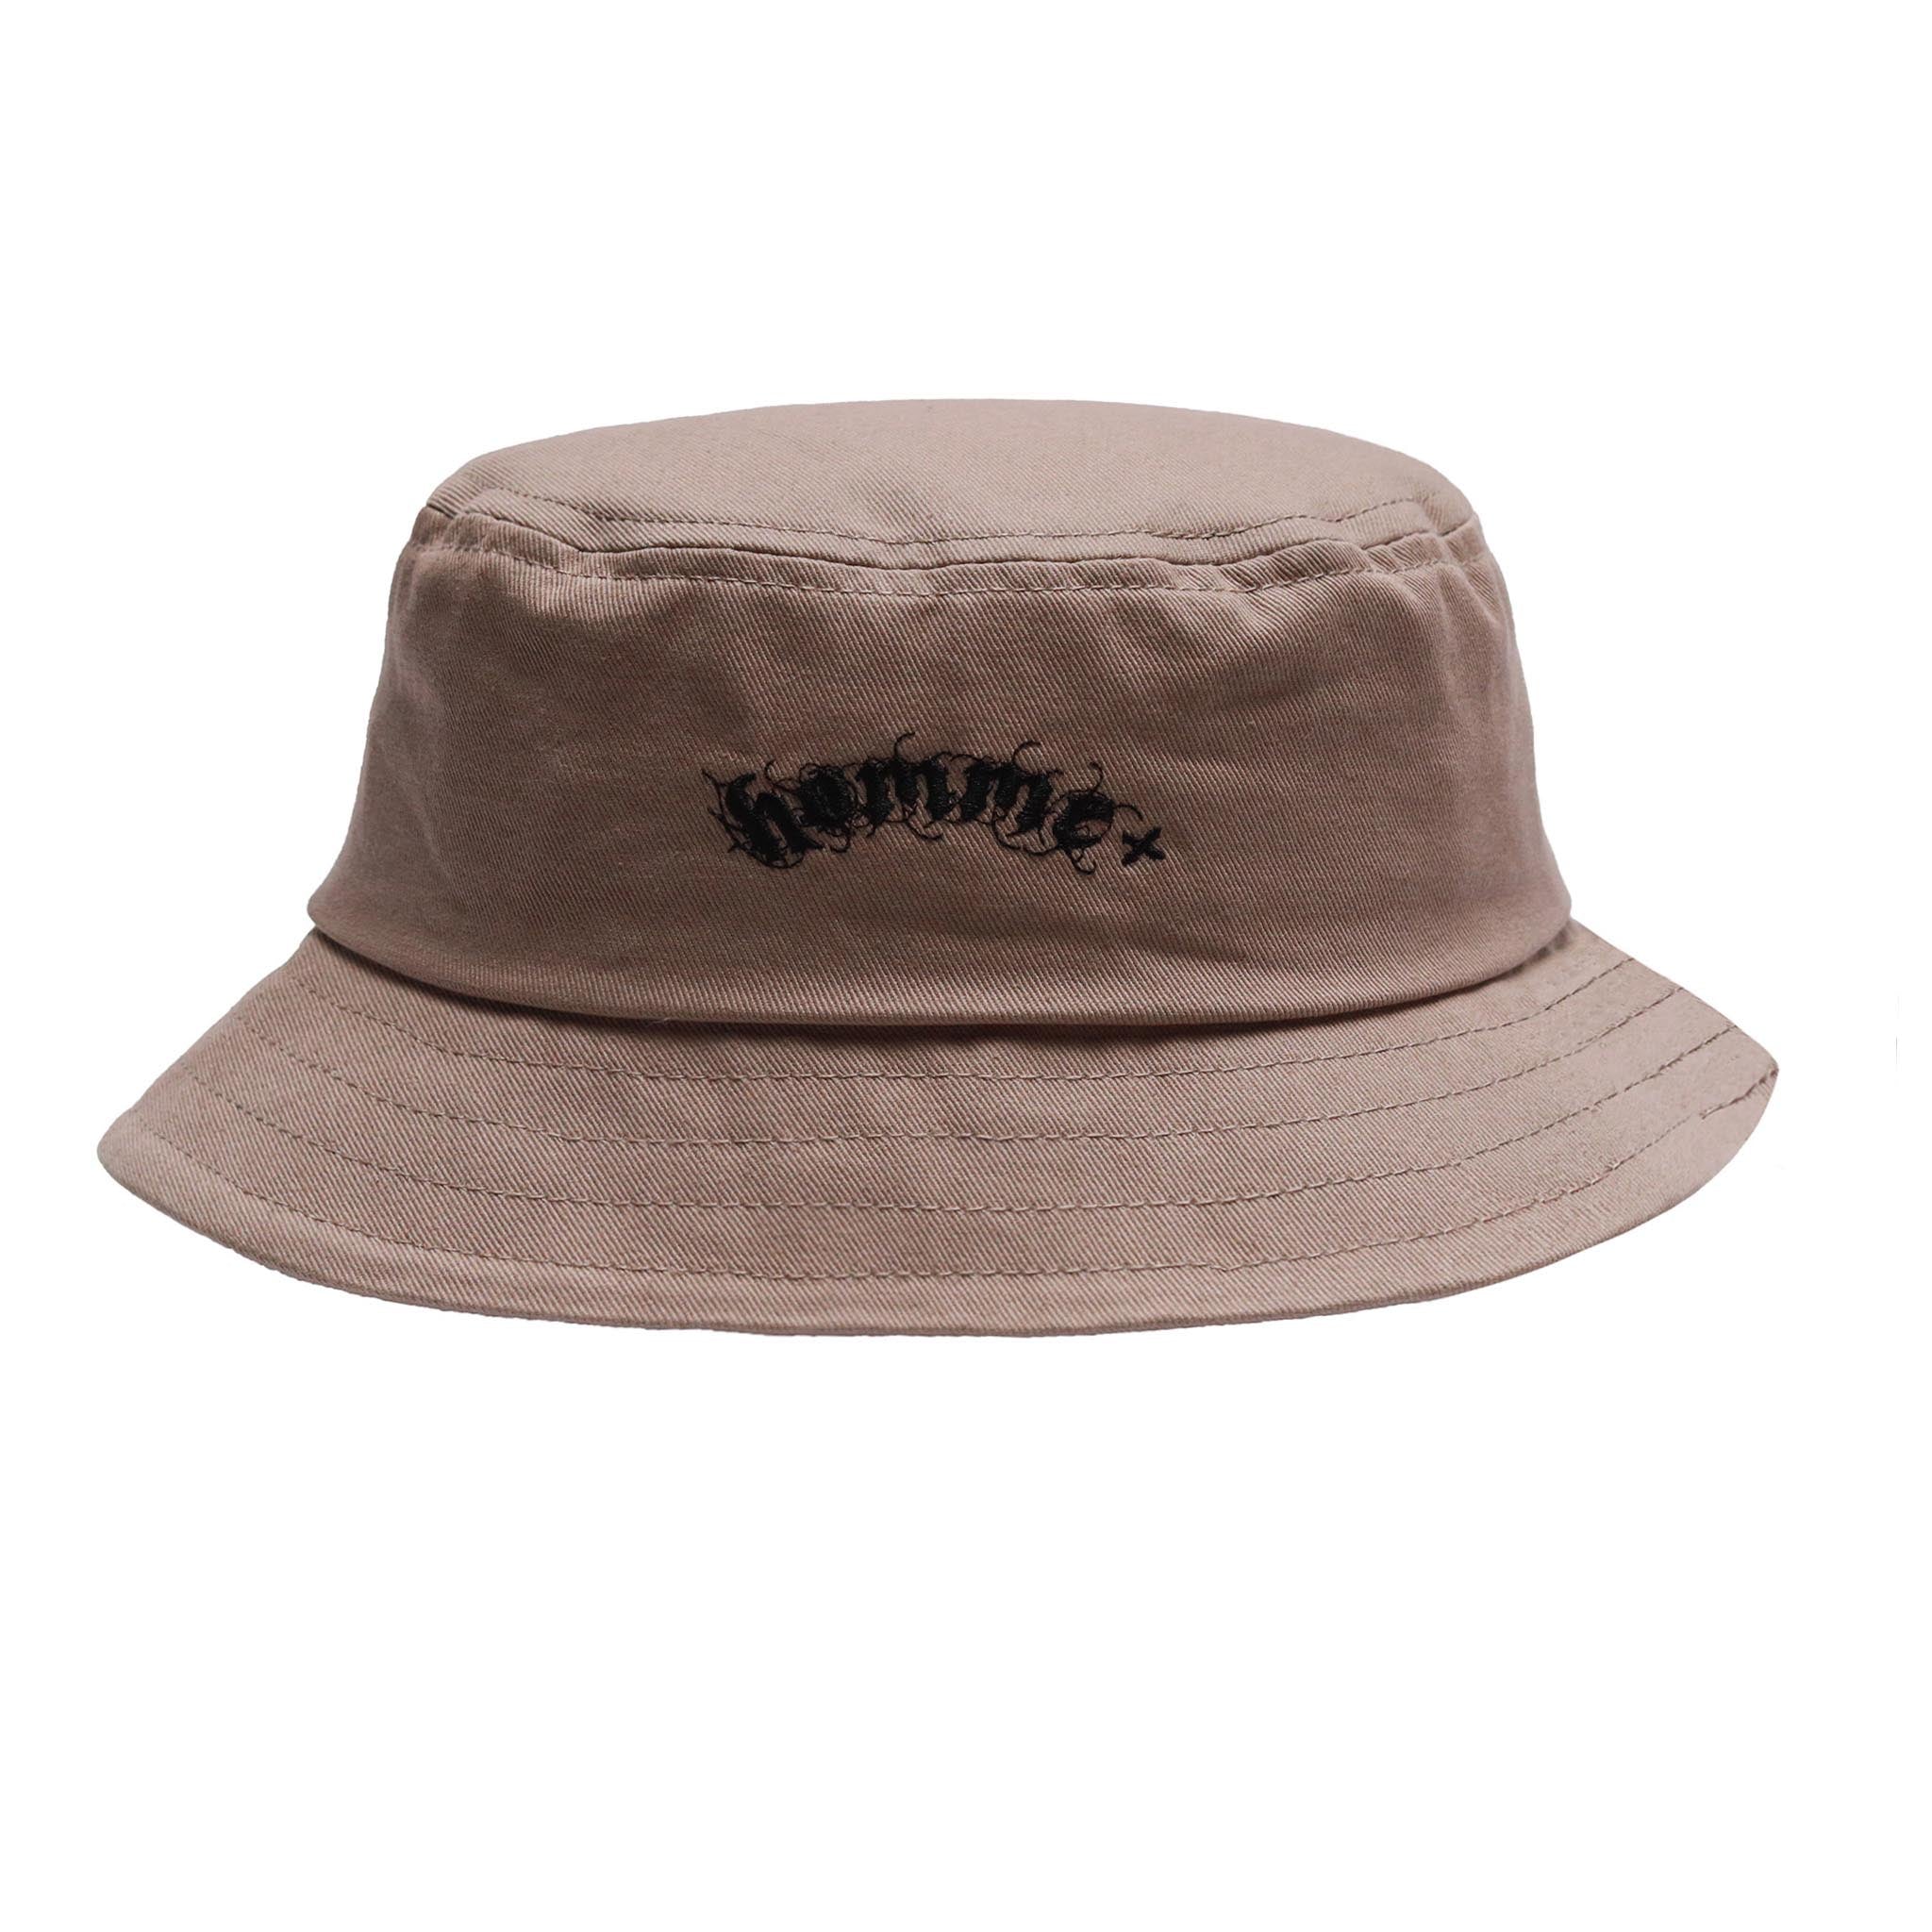 HOMME+ Gothic Print Bucket Hat Taupe